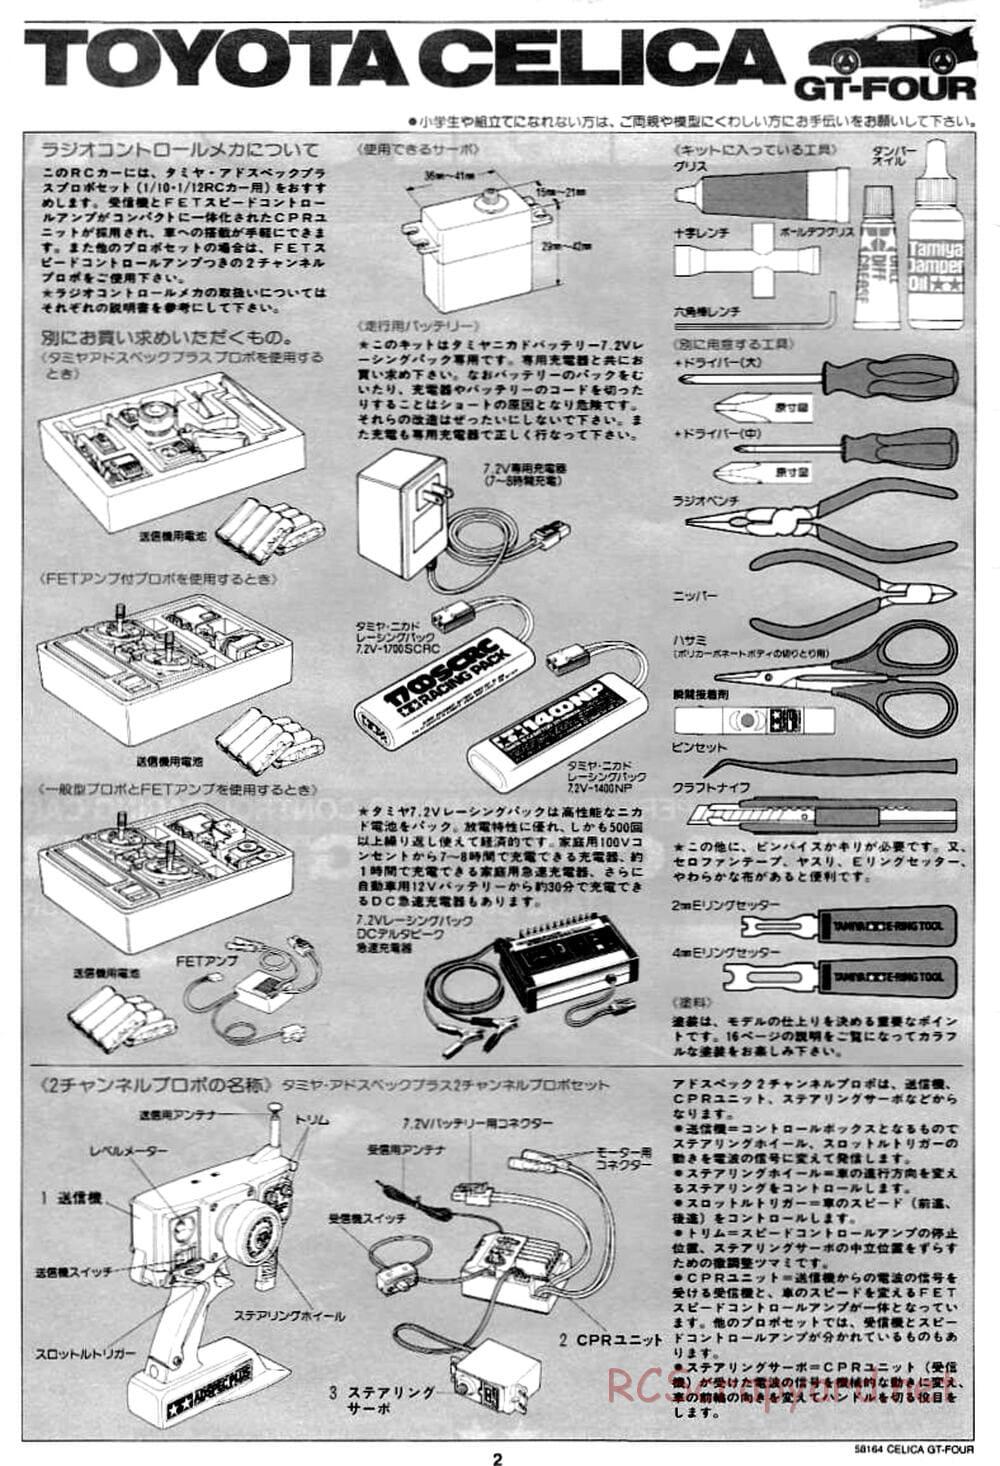 Tamiya - Toyota Celica GT Four - TA-02 Chassis - Manual - Page 2